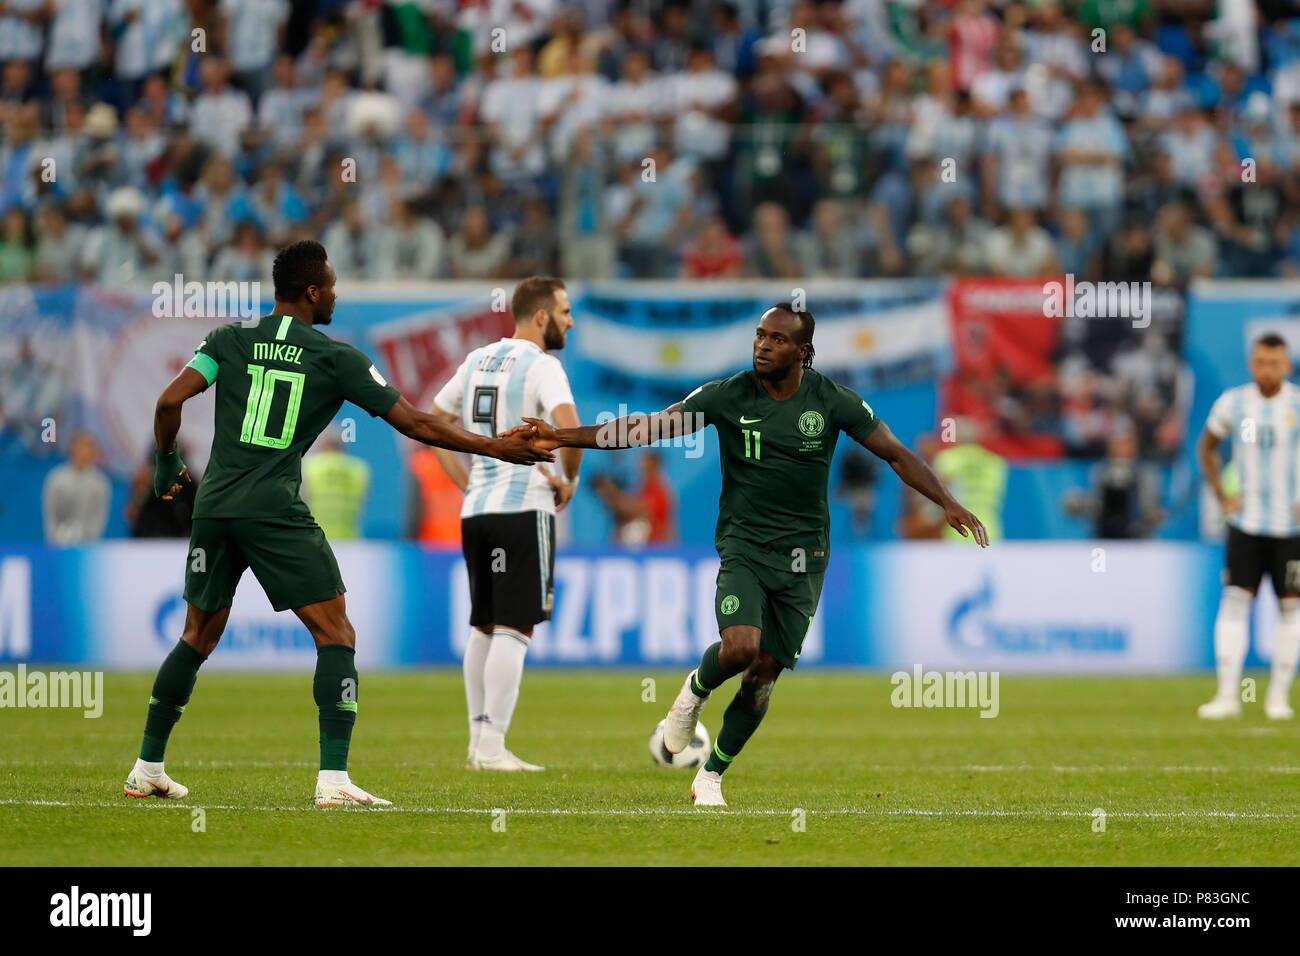 Saint Petersburg, Russia. 26th June, 2018. (L-R) John Obi Mikel, Victor Moses (NGA) Football/Soccer : Mikel and Moses celebrate after Moses's goal on FIFA World Cup Russia 2018 match between Nigeria 1-2 Argentina at the Saint Petersburg Stadium in Saint Petersburg, Russia . Credit: Mutsu KAWAMORI/AFLO/Alamy Live News Stock Photo